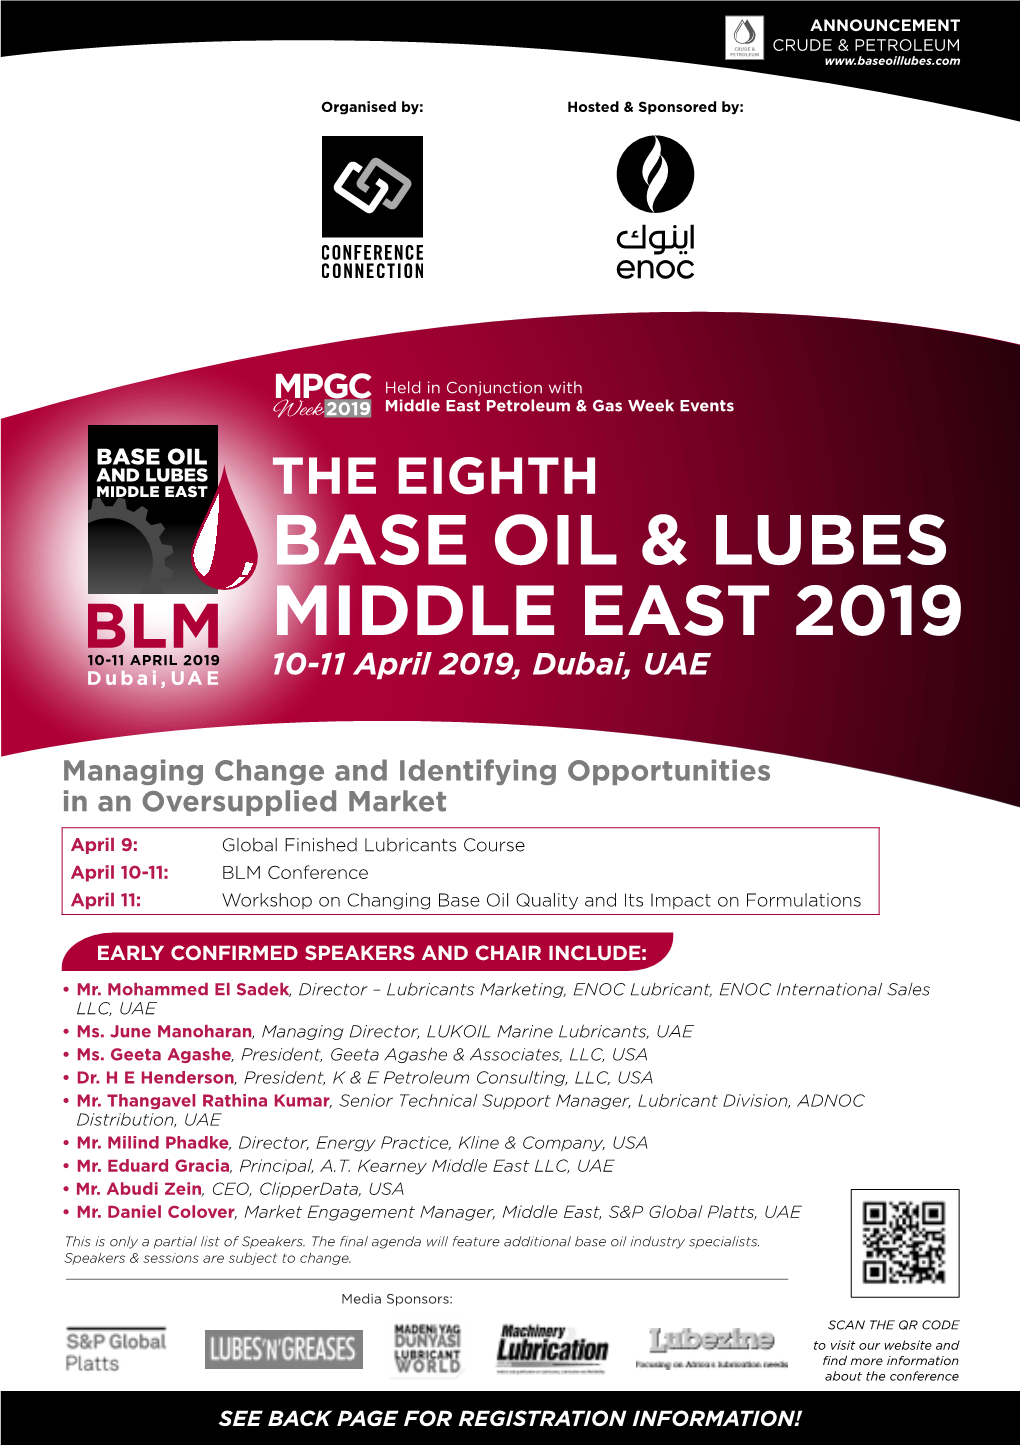 Base Oil & Lubes Middle East 2019